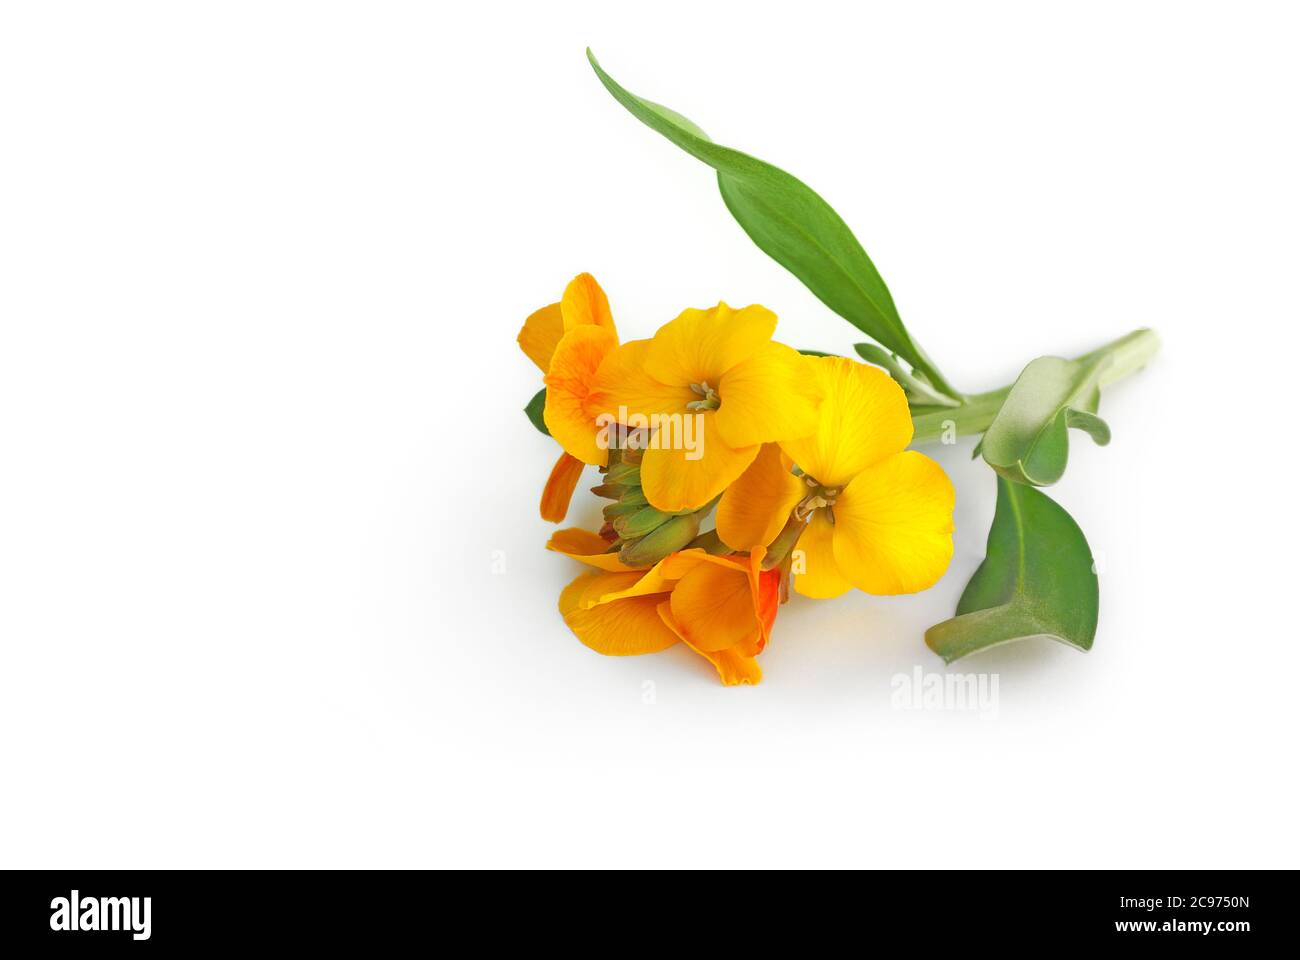 Isolated plant lies on white background Stock Photo